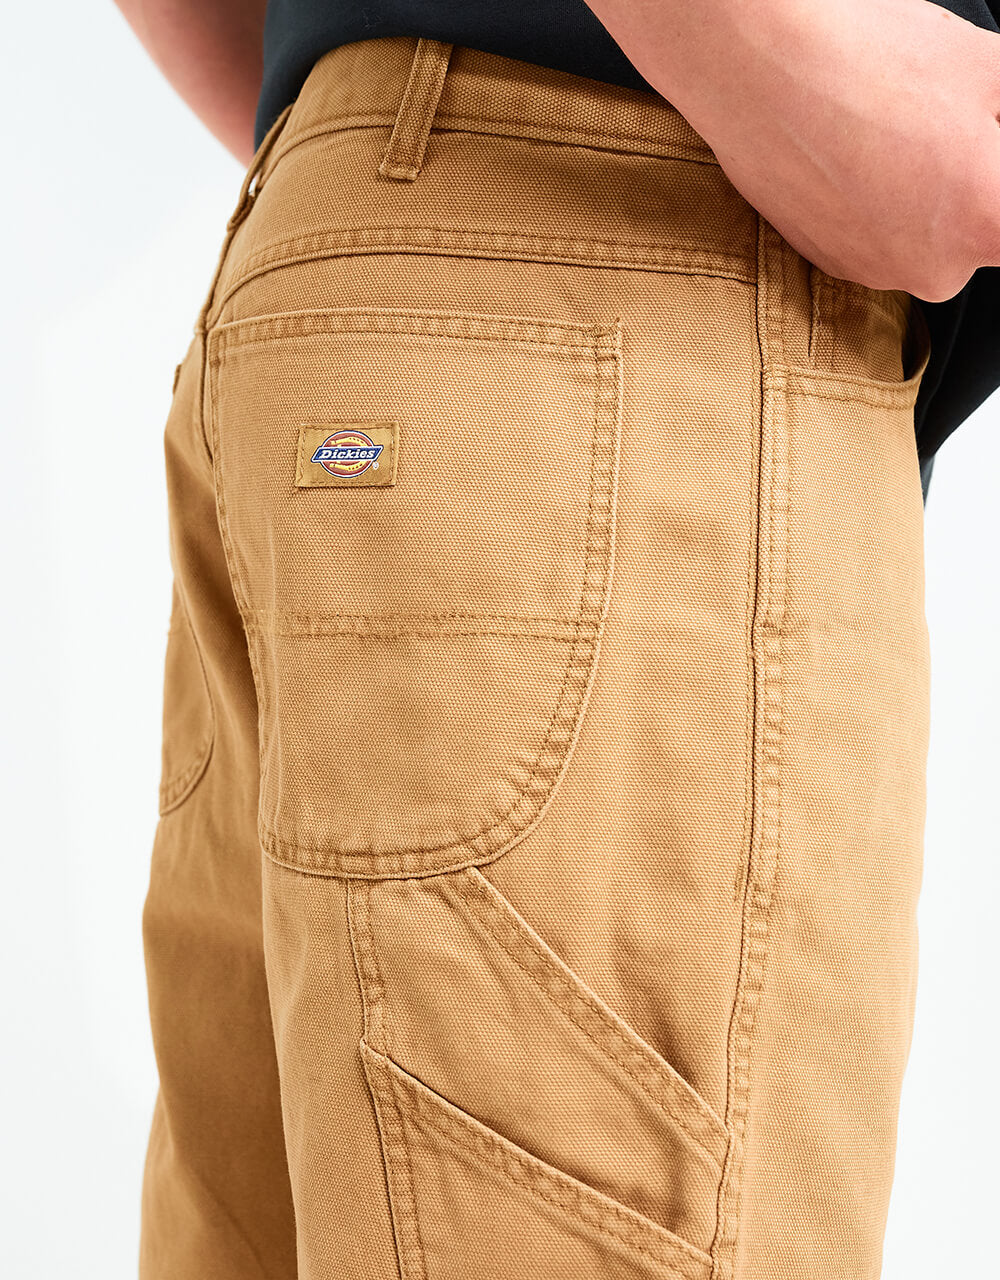 Dickies Duck Canvas Short - Stone Washed Brown Duck